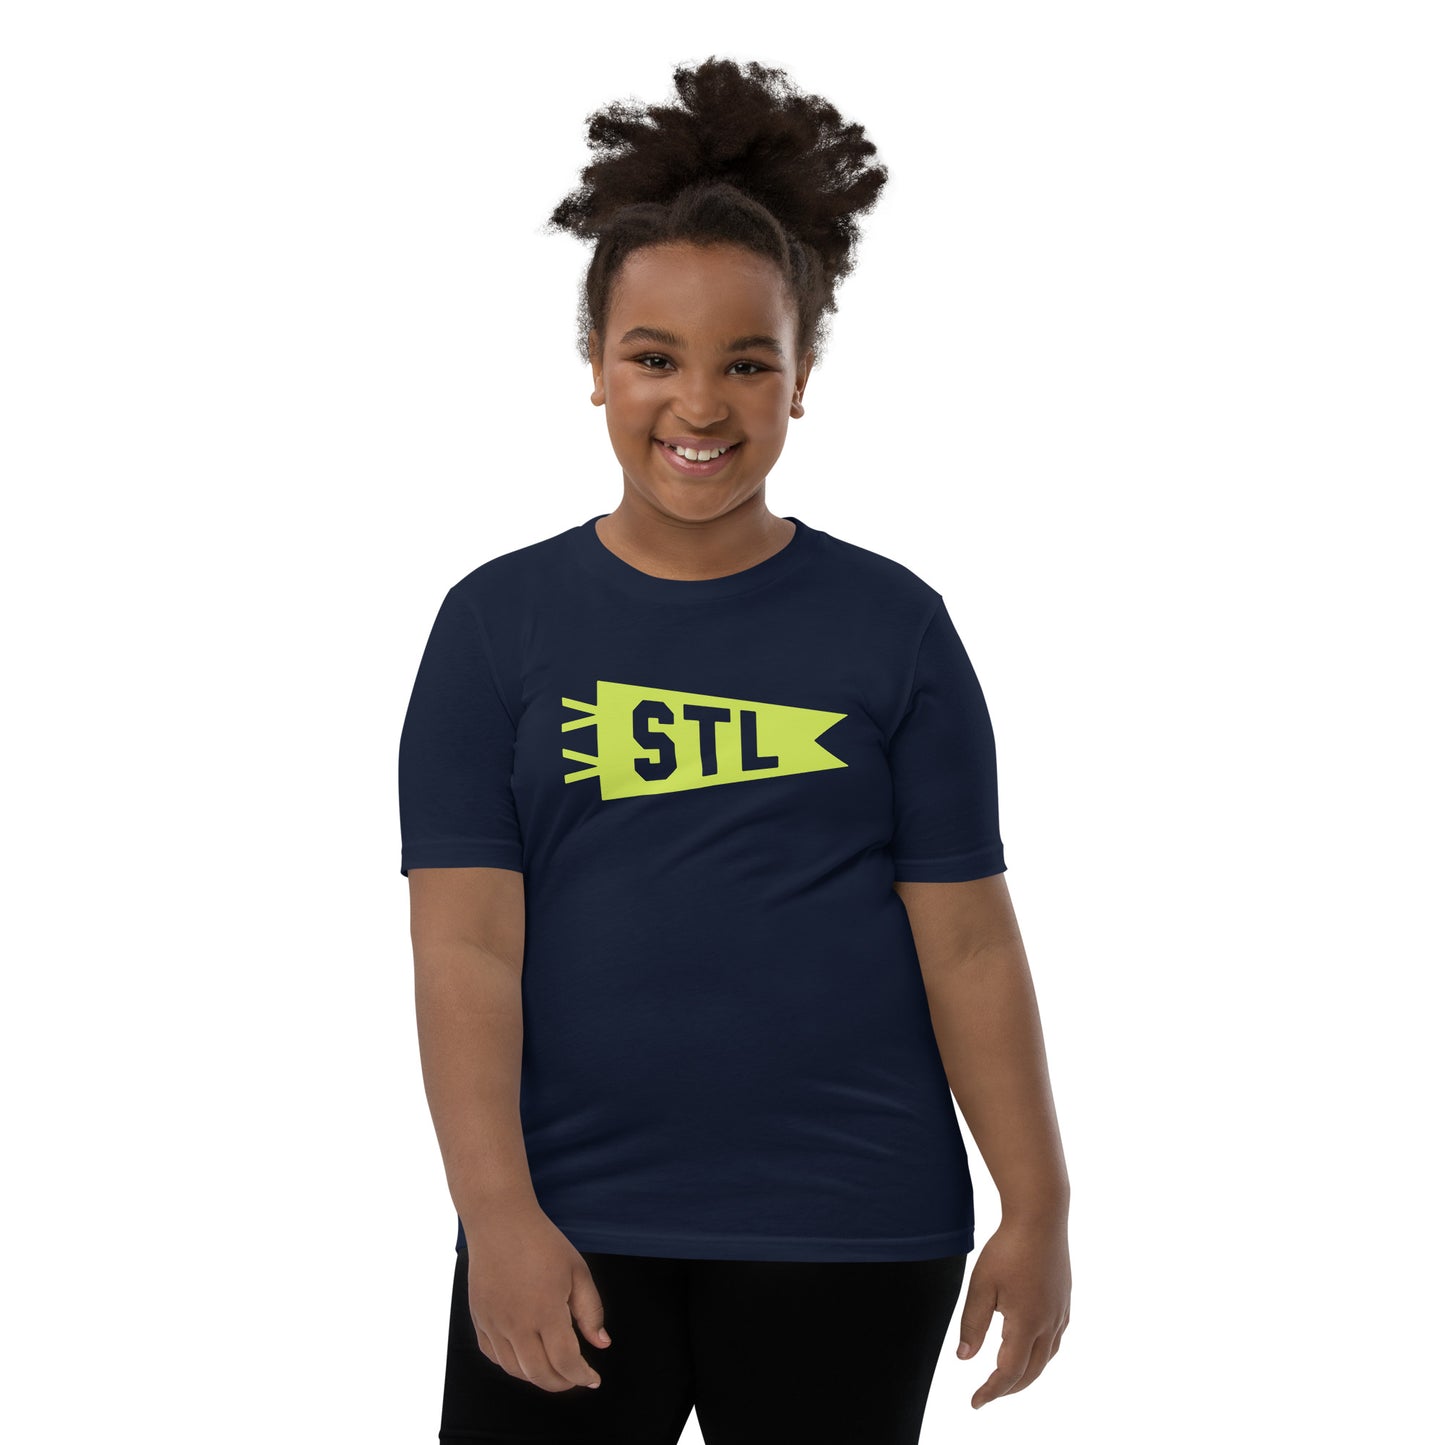 Kid's Airport Code Tee - Green Graphic • STL St. Louis • YHM Designs - Image 05